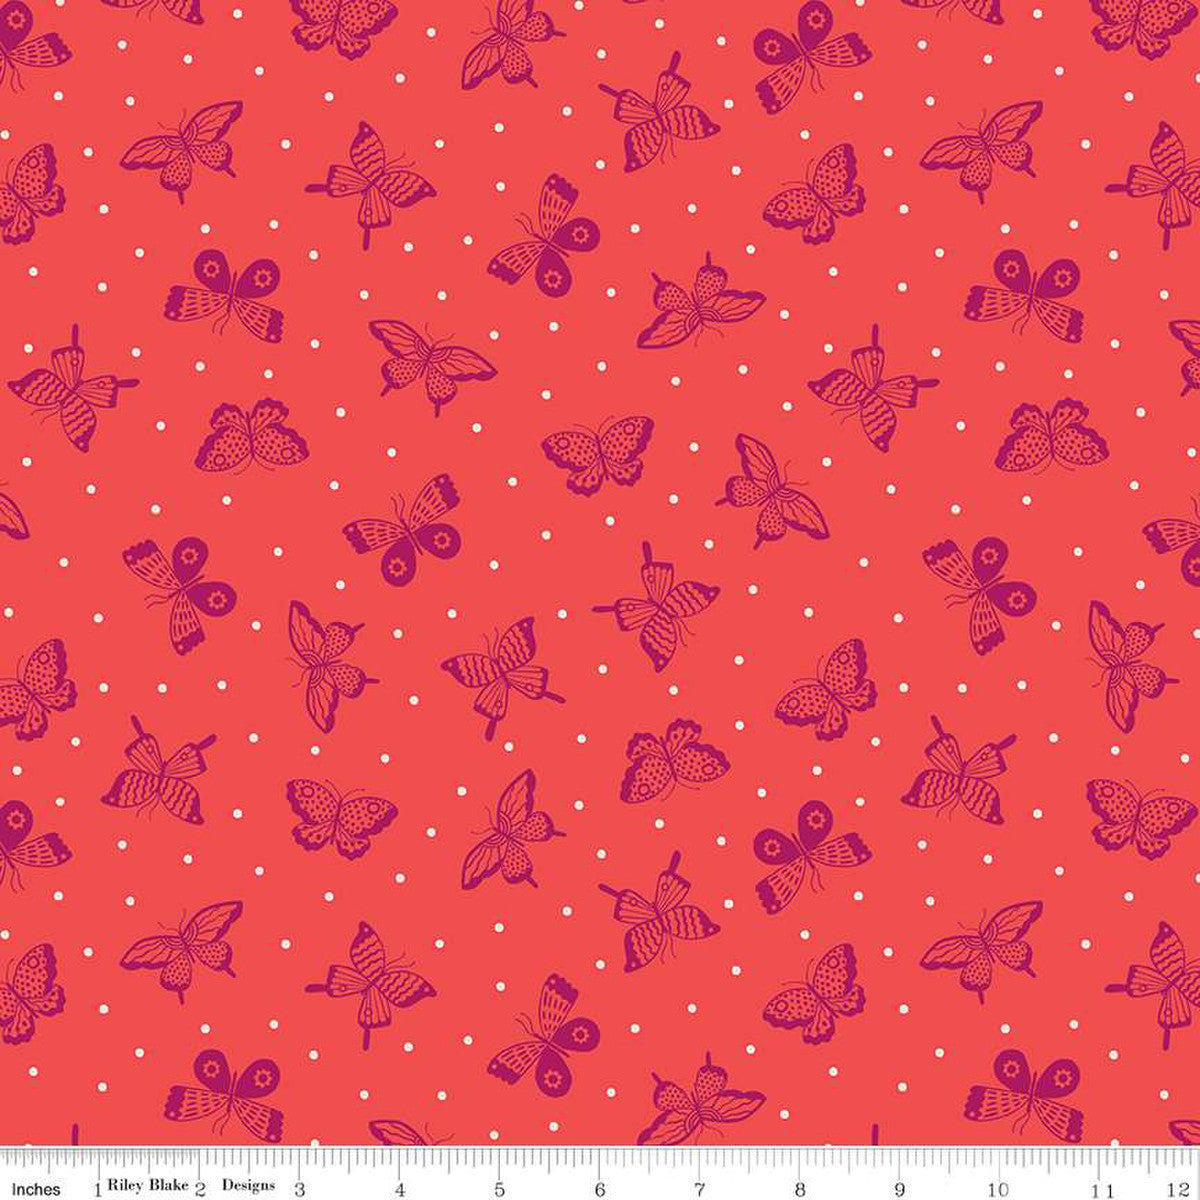 Sweet Picnic Cherry/Poppy Butterflies Fabric by the Yard